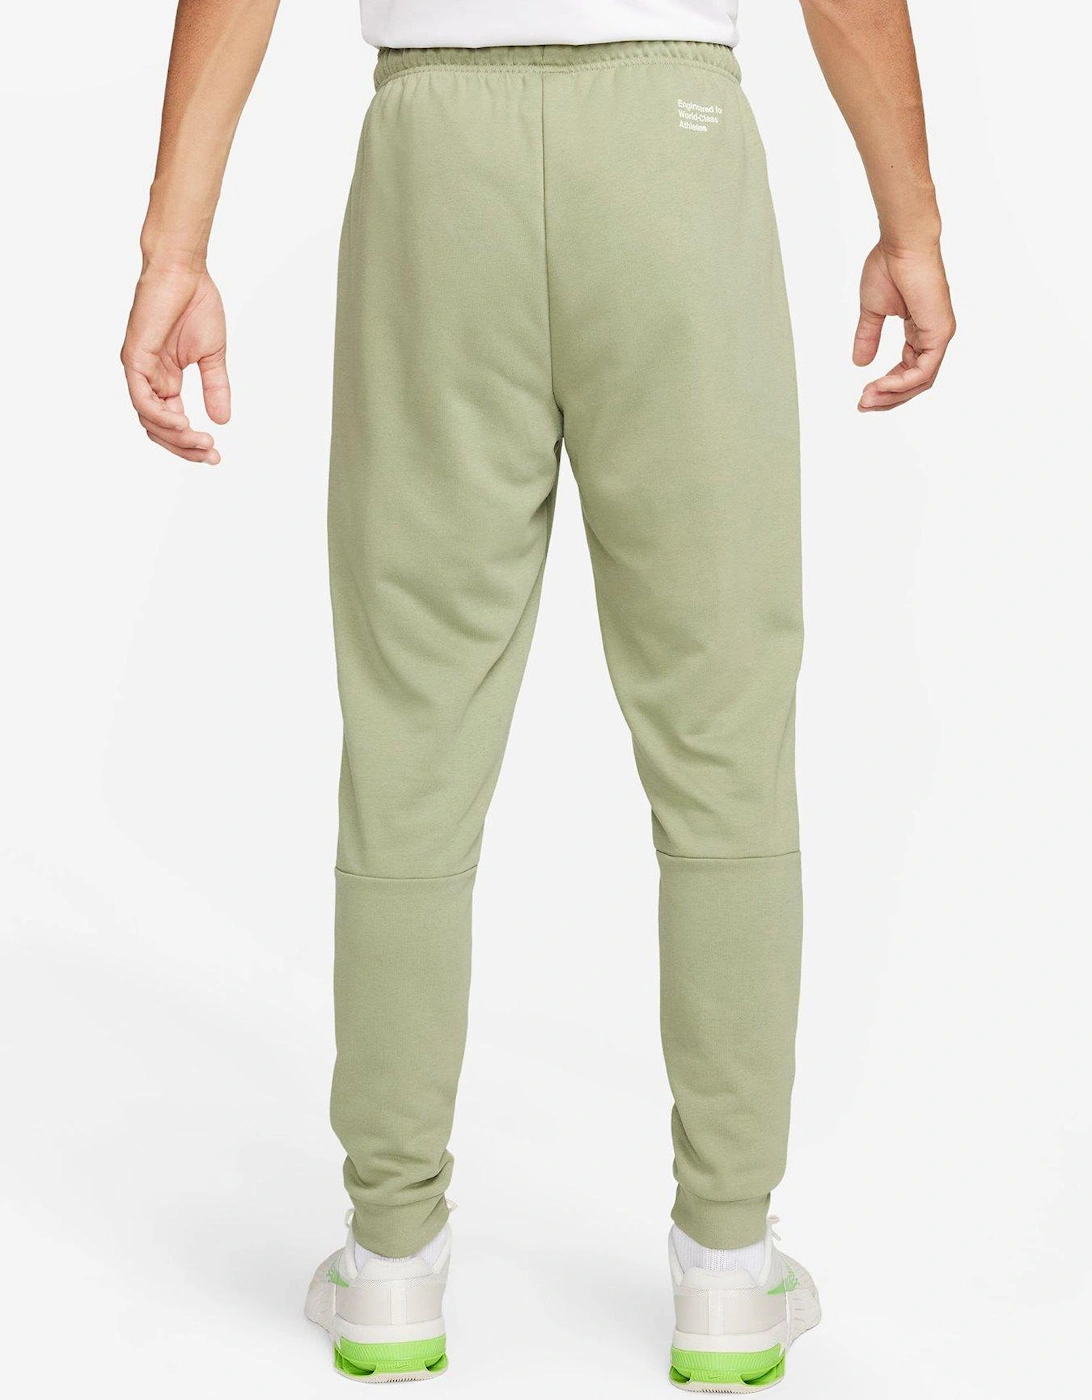 Mens Training Tapered Pants - Green